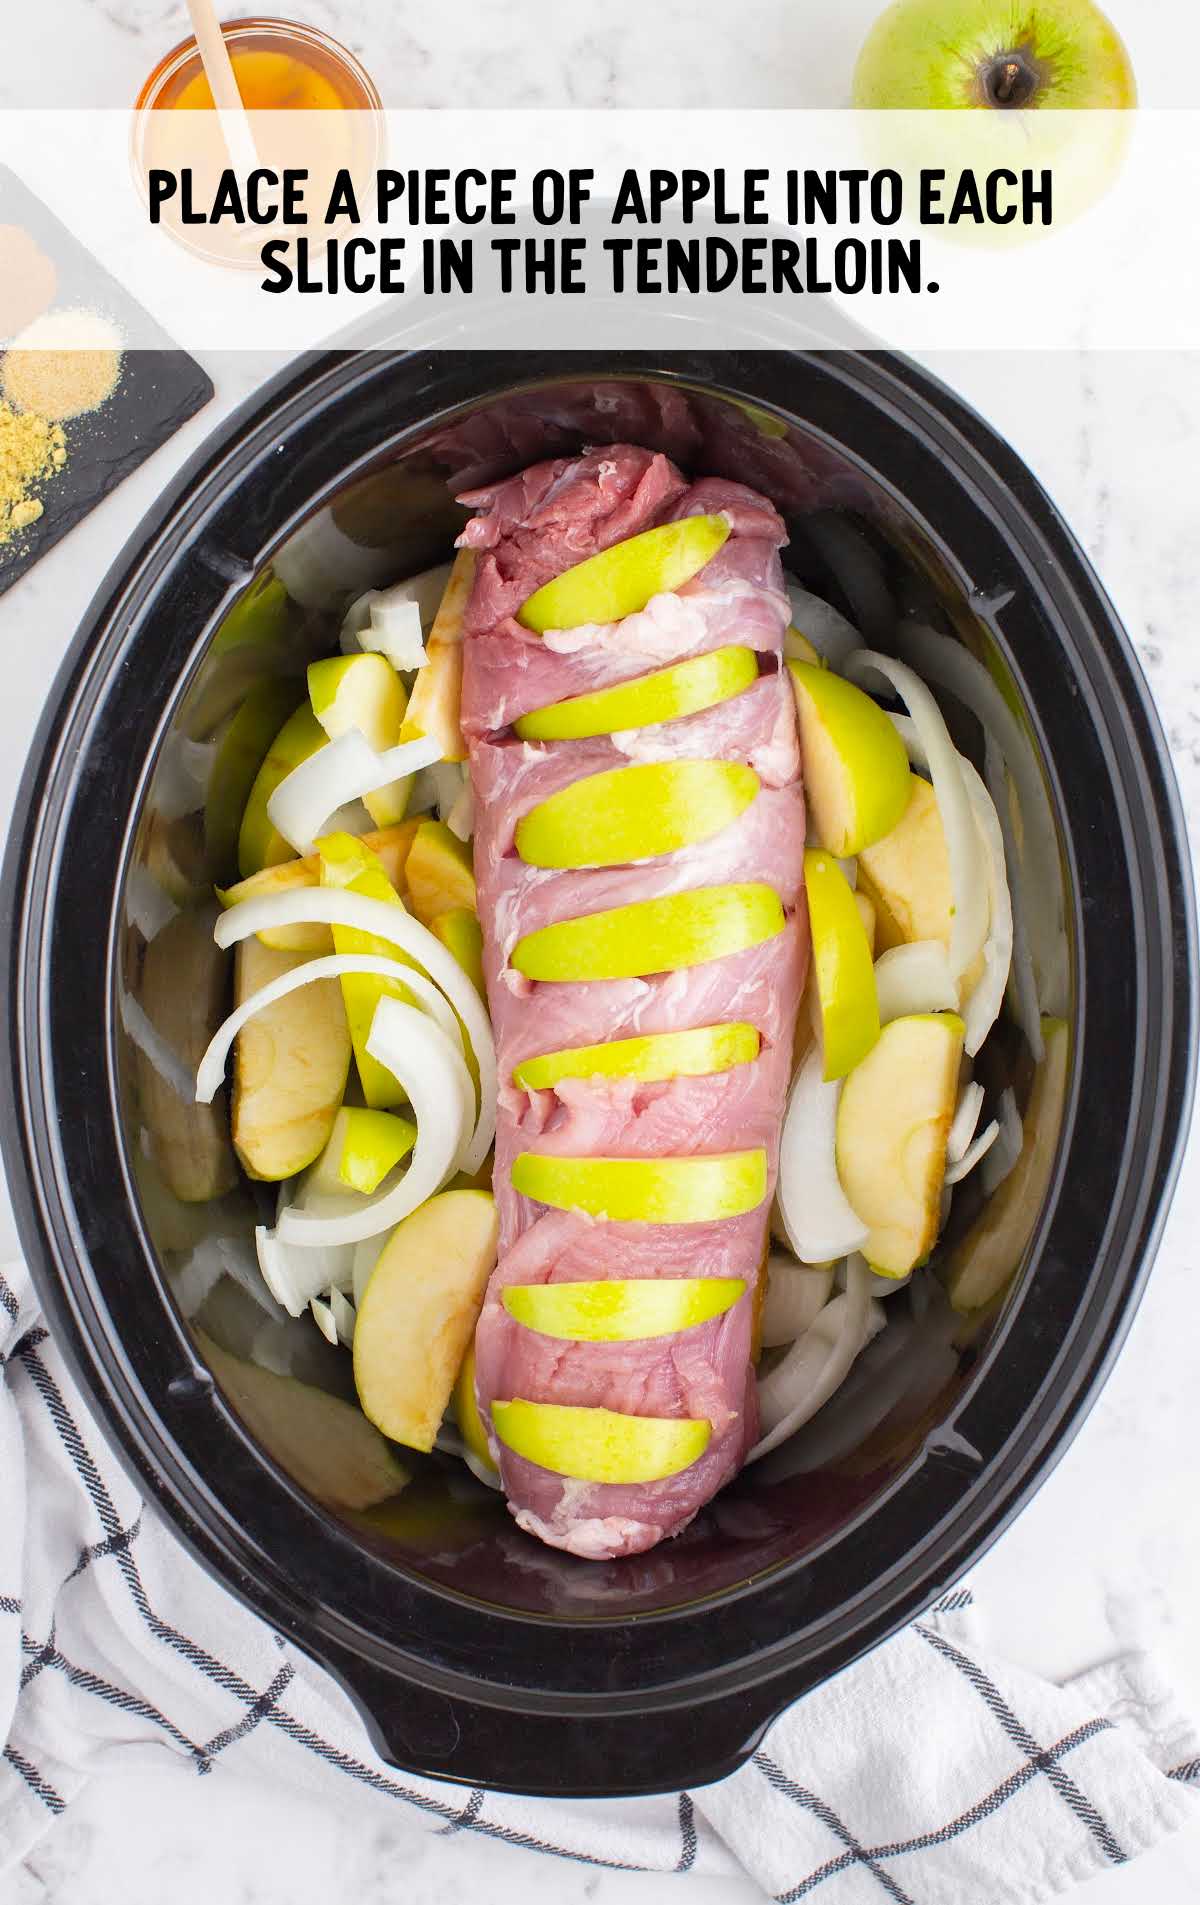 sliced tenderloin stuffed with apple slices placed in the crockpot